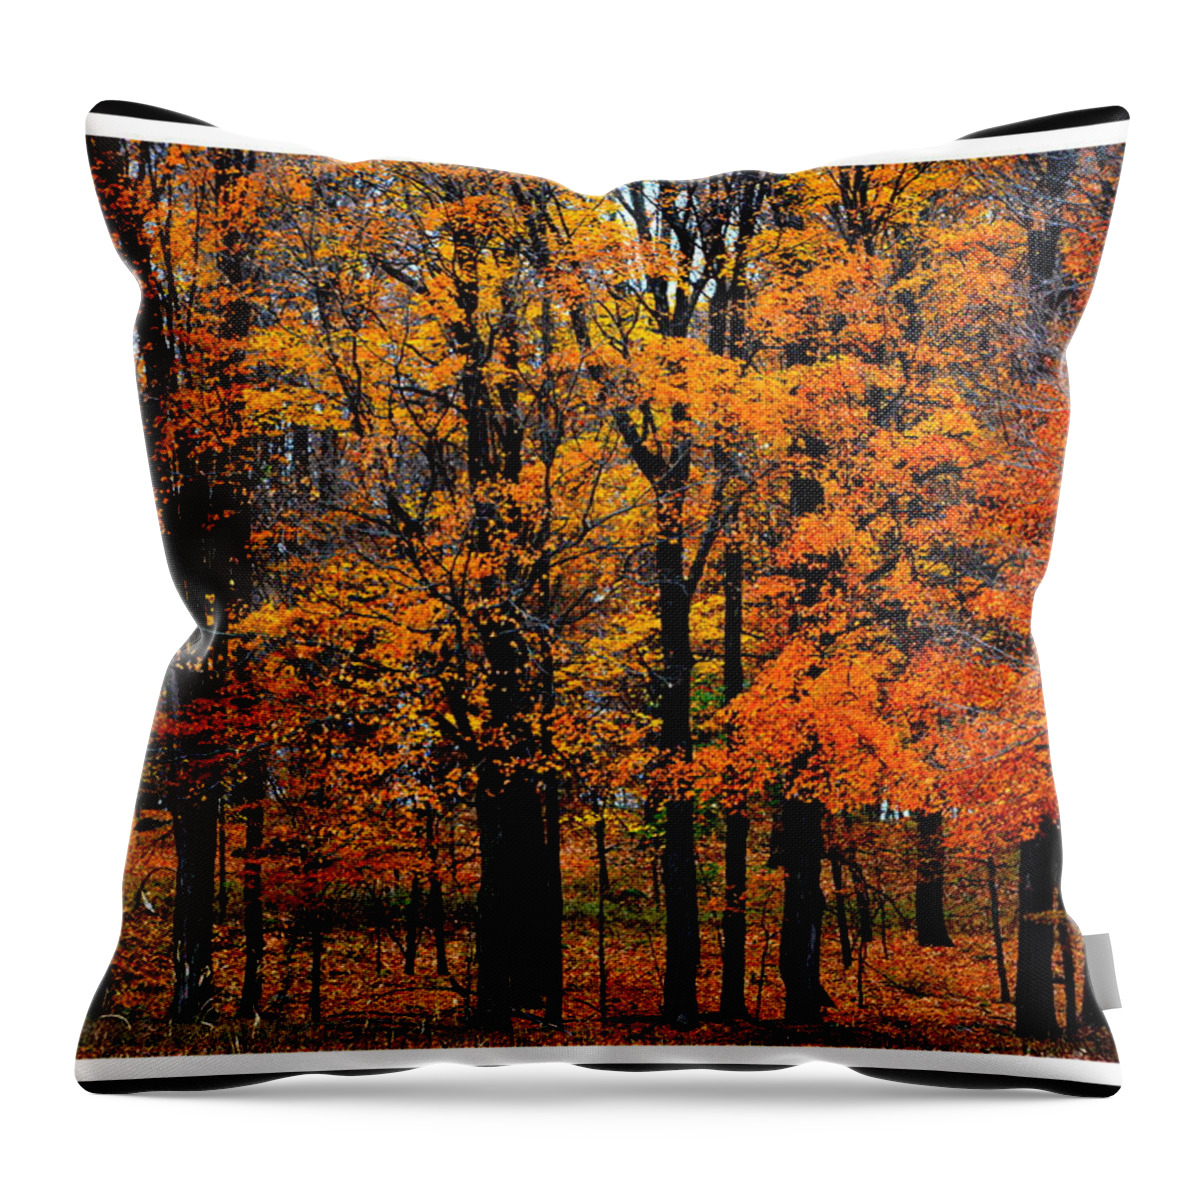 Fall Throw Pillow featuring the photograph Tree Confetti by Kimberly Woyak